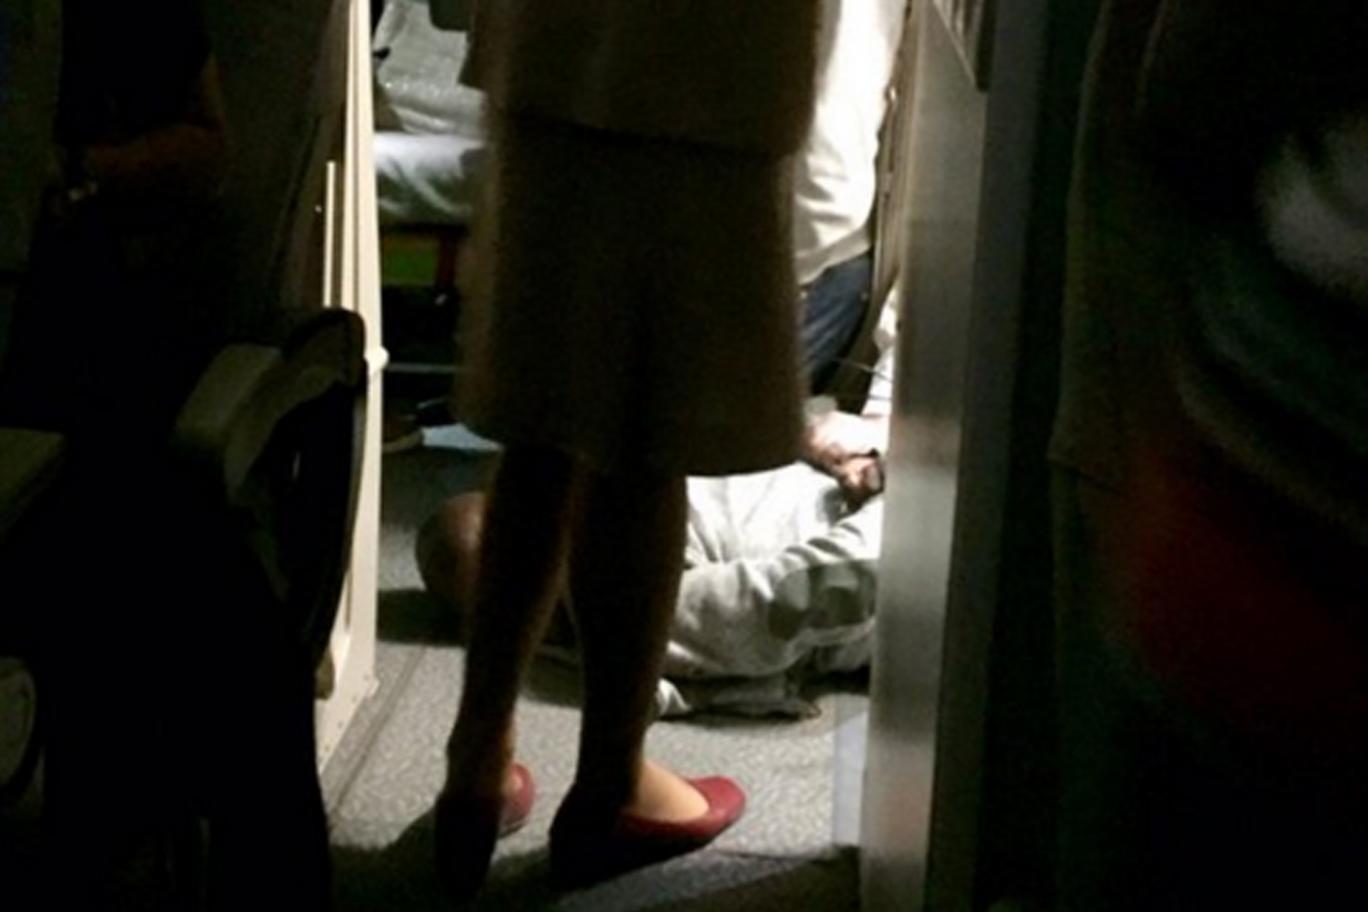 1-Passenger-restrained-by-cabin-crew-and-police-after-mid-air-attack-on-flight-from-Dubai-to-London